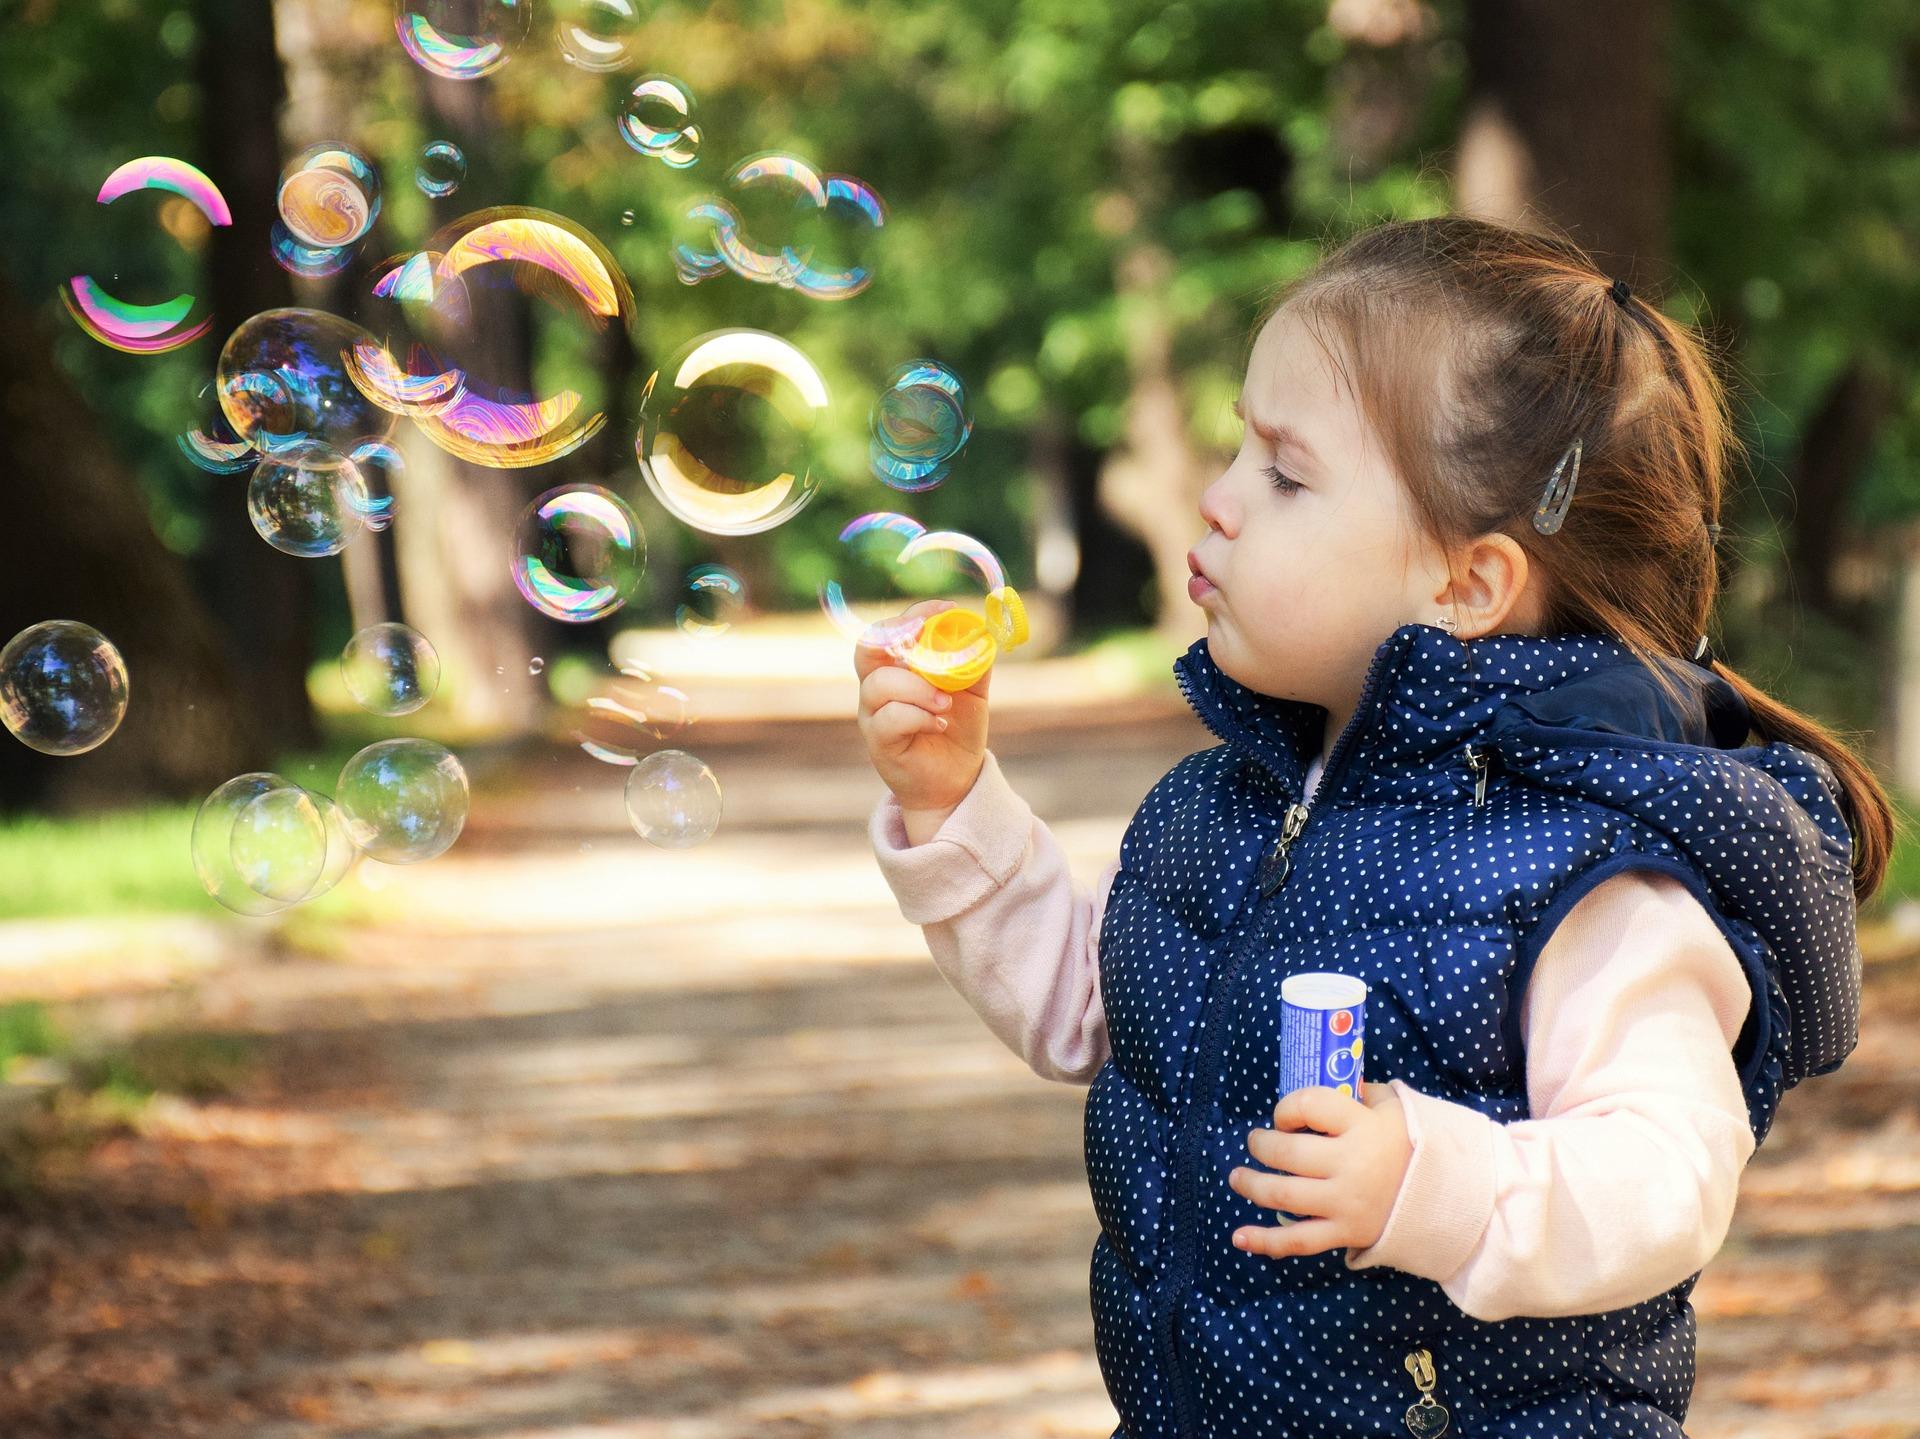 A little girl blowing bubbles in a park - Adopting a newborn vs adopting a toddler - Baby Journey